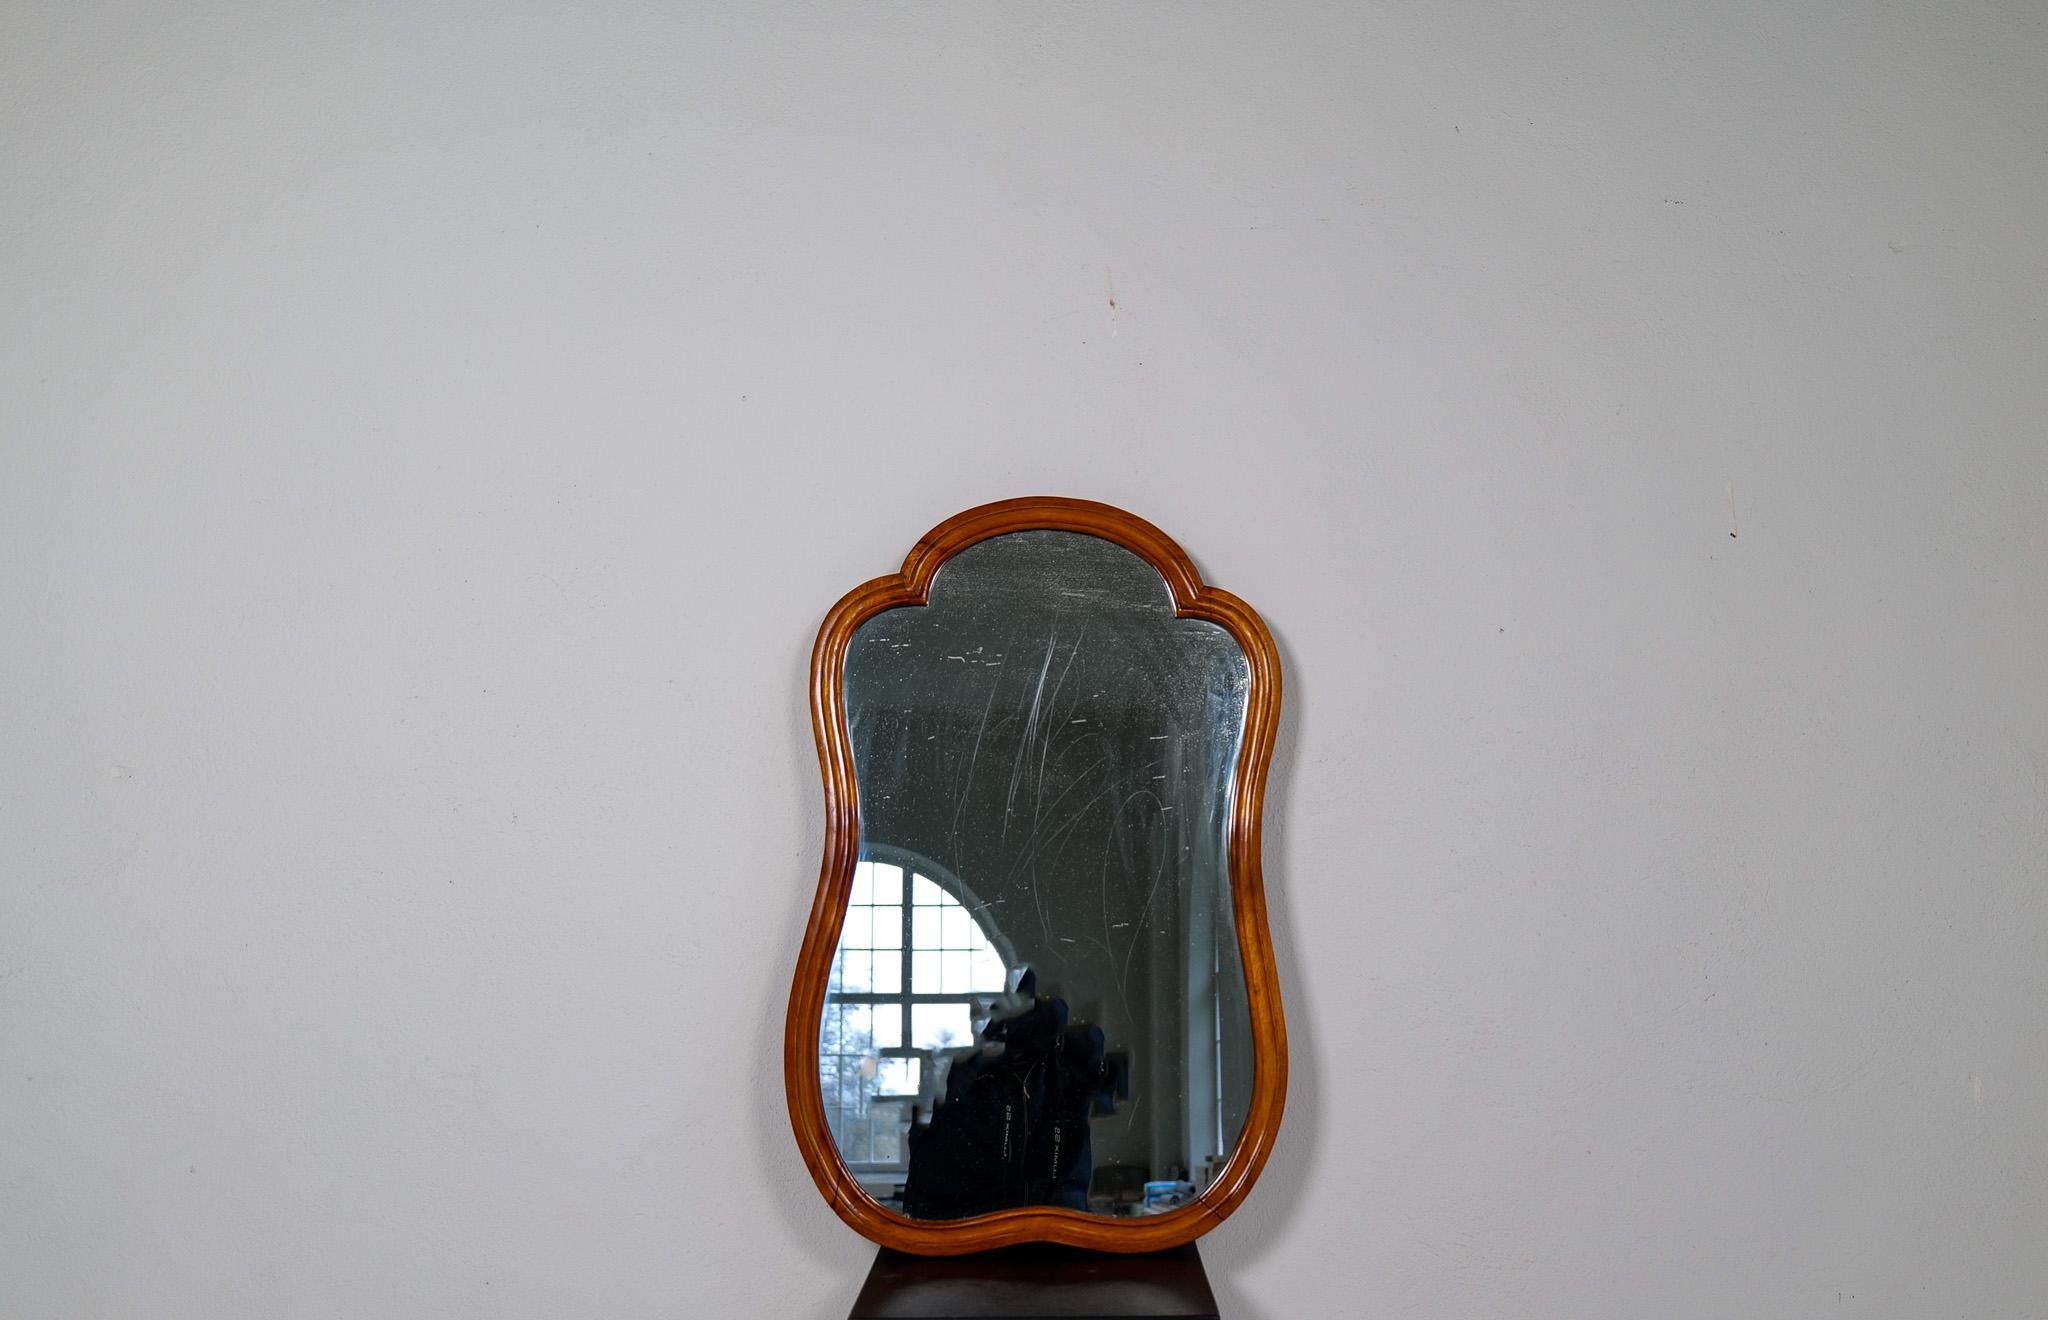 Sculptural wall mirror in walnut, produced in Sweden during the 1920s.
The mirror is made in walnut. The mirror itself is made with curvy sculptural lines.

Good vintage condition, small scratches, and the glass somewhat distressed. Small holes